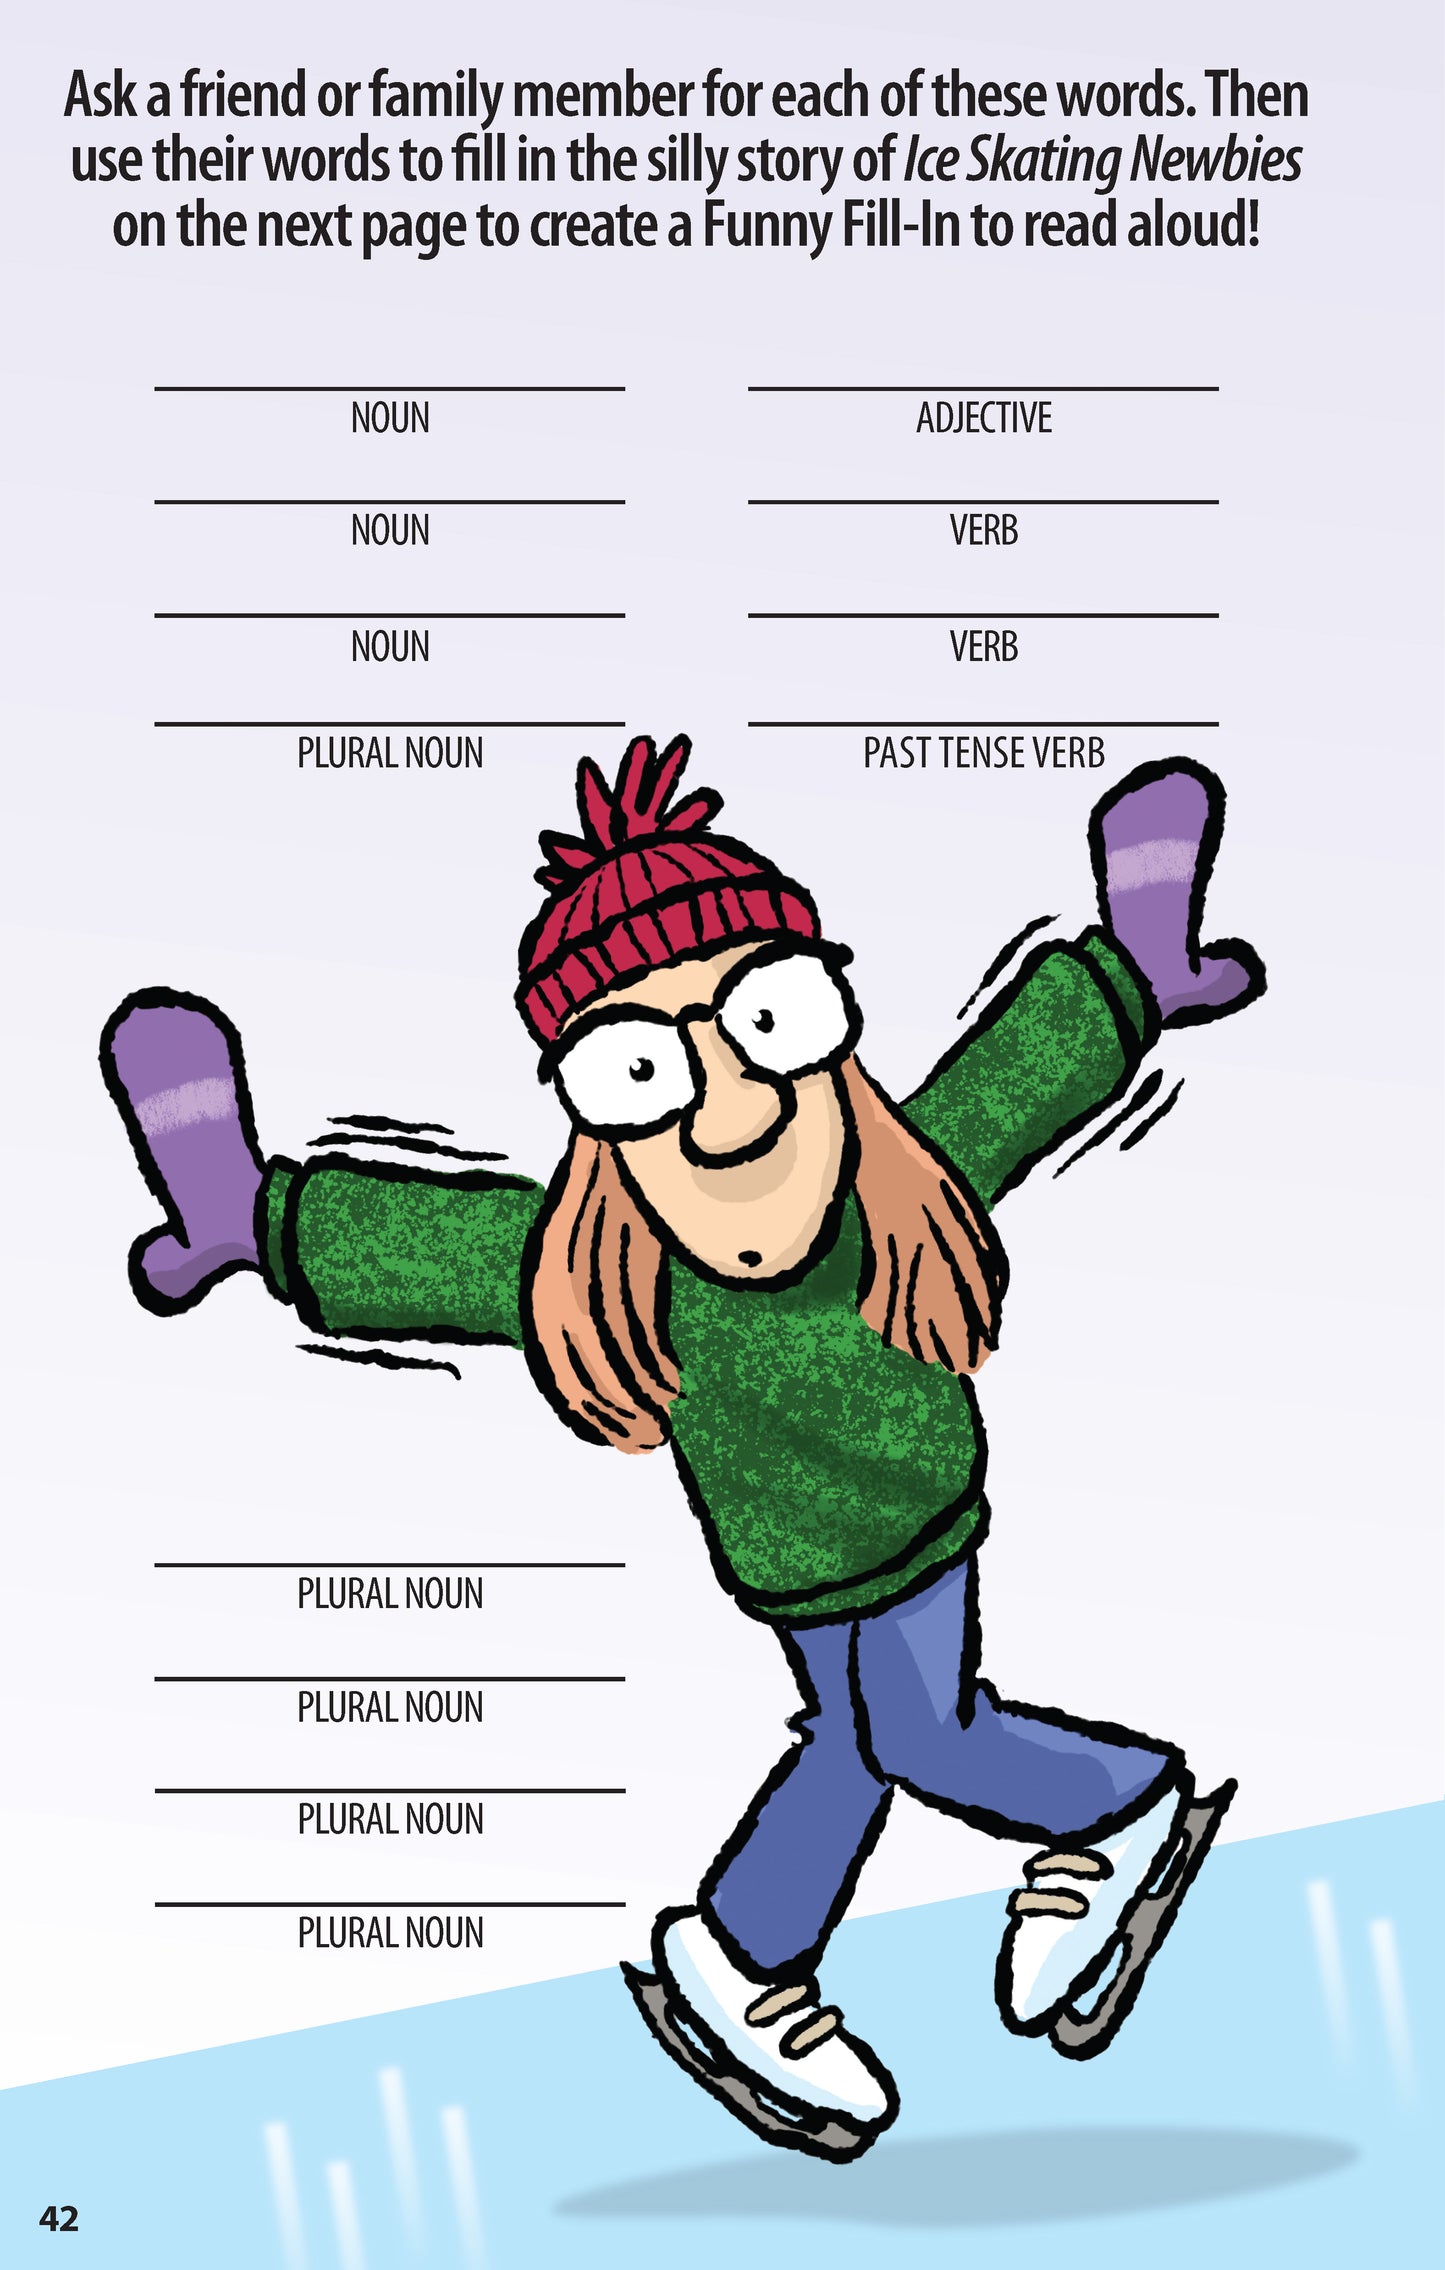 Sports Funny Fill-Ins  for Kids